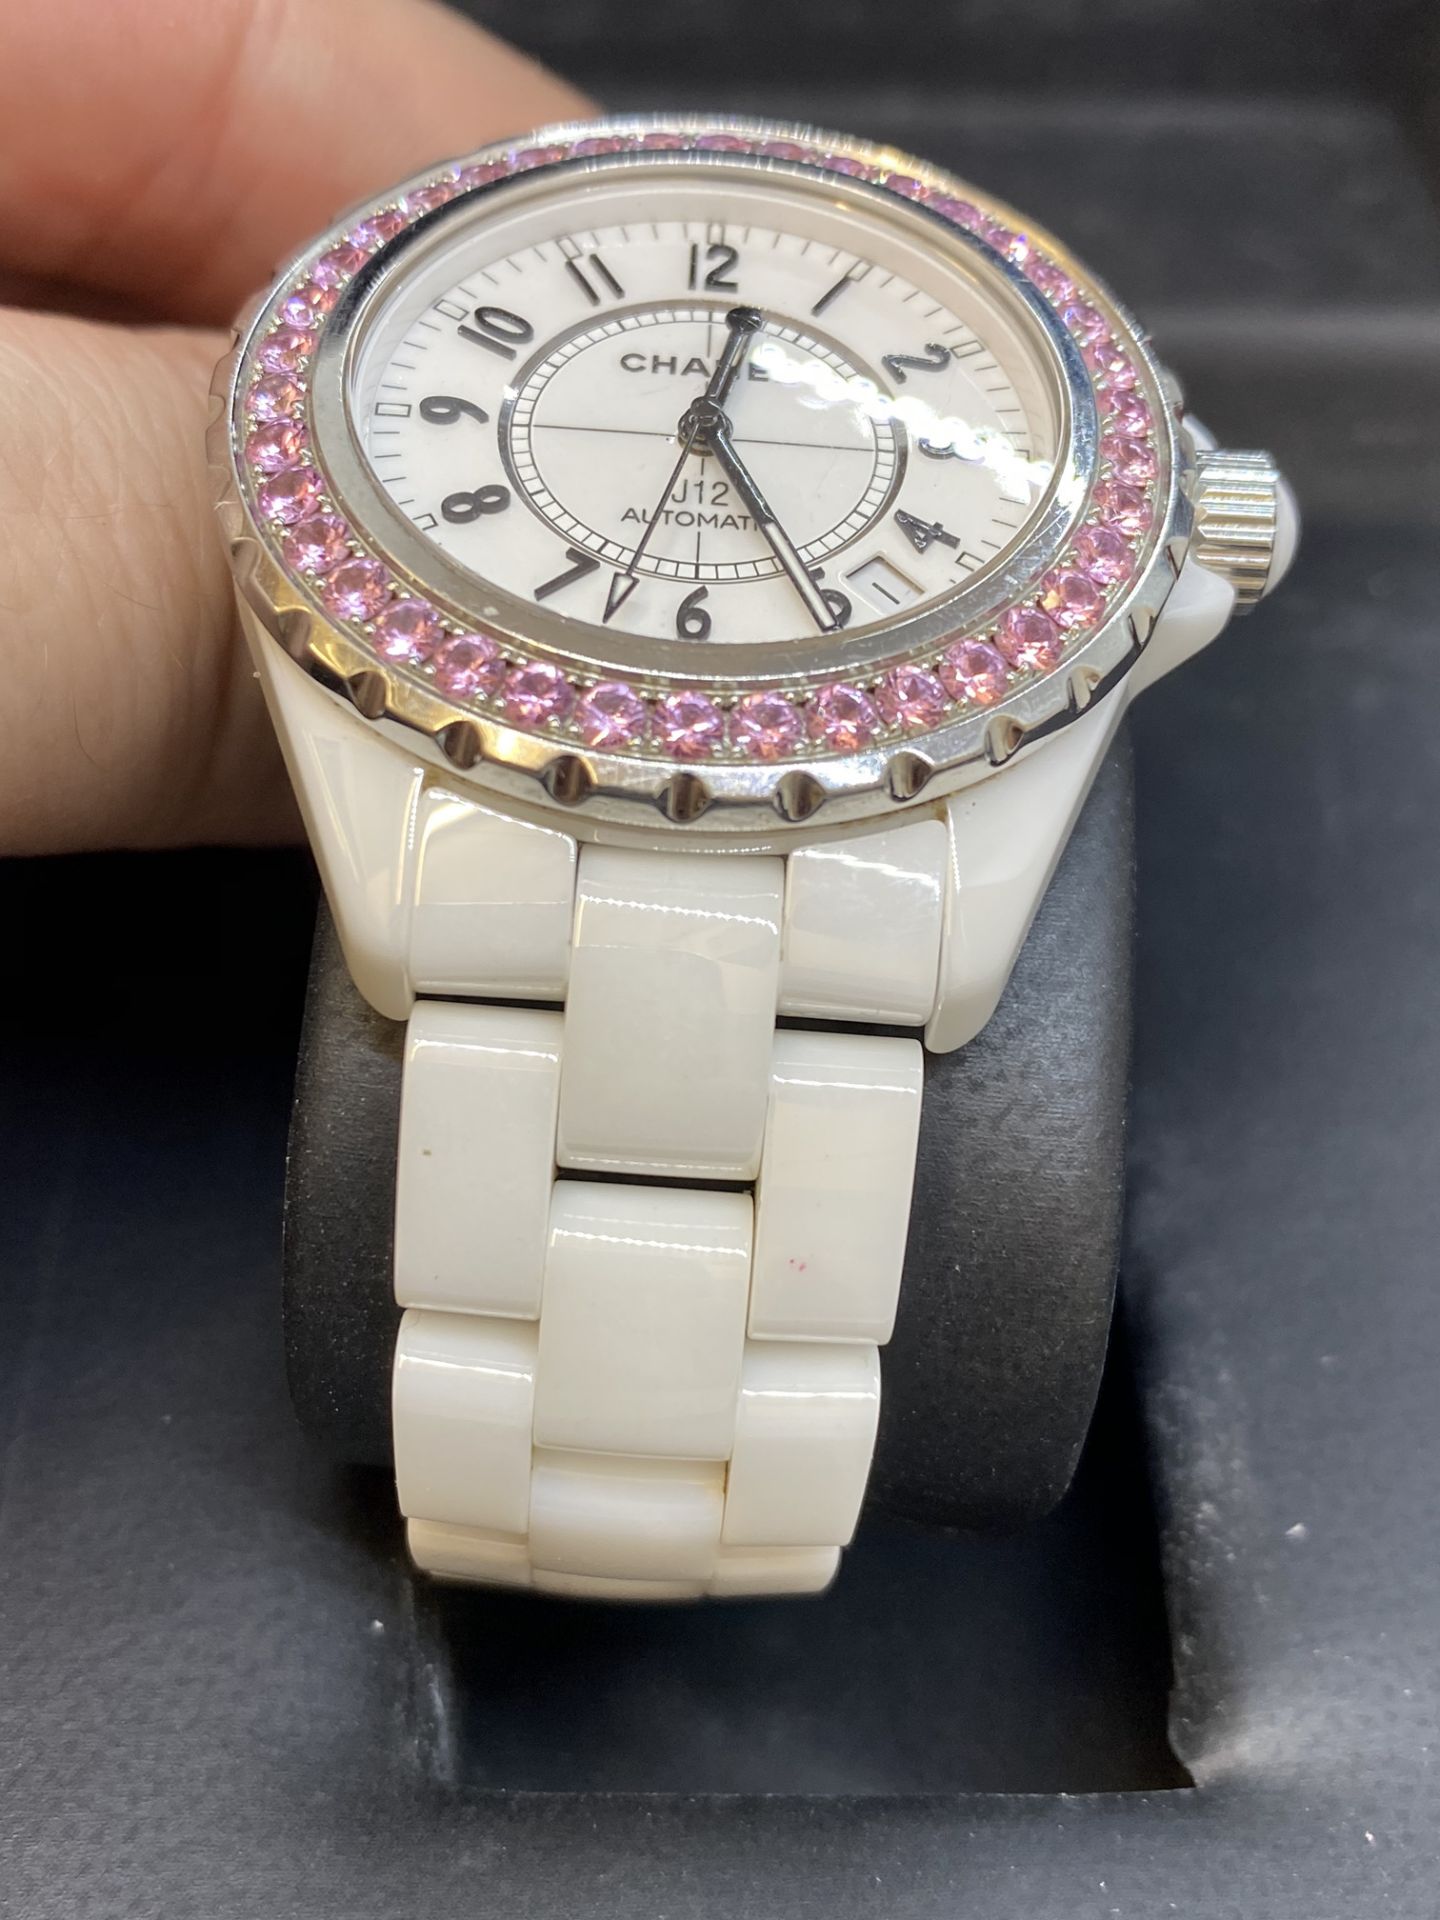 Chanel J12 Automatic Watch Set with Pink Sapphire Bezel with Box - Image 5 of 10